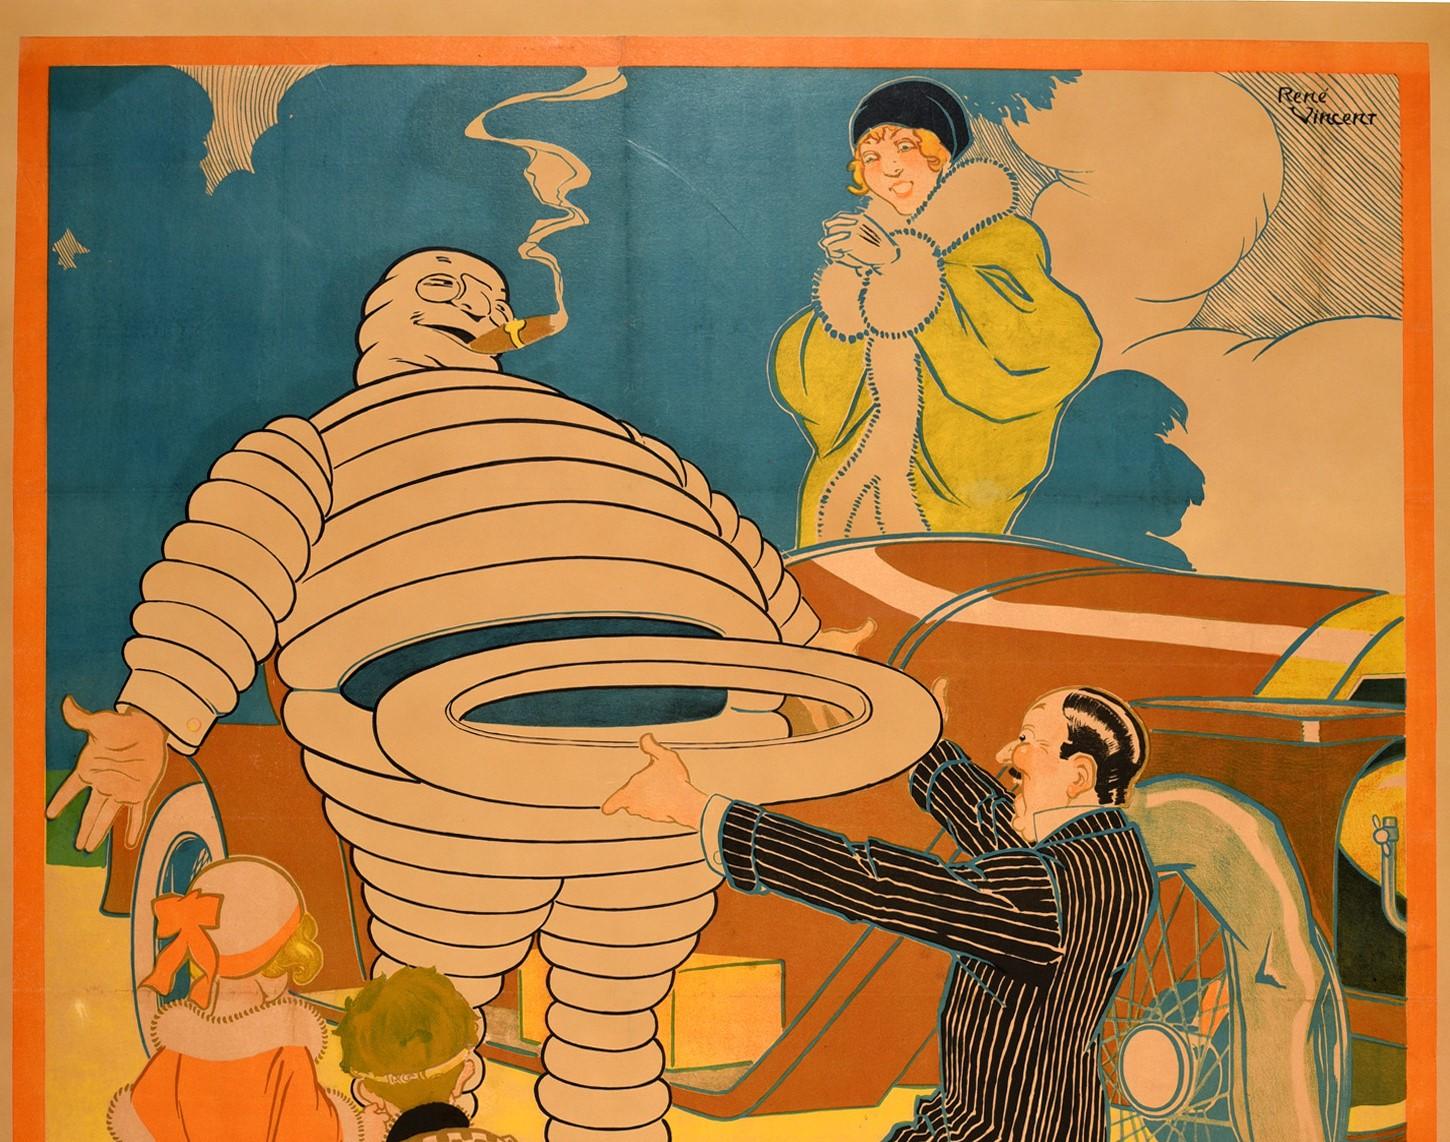 Original vintage advertising poster for Michelin tyres featuring a great illustration by Rene Vincent (1879-1936) showing the trademark Bibendum character - the iconic Michelin Man figure made from tires - smoking a cigar and smiling as he offers a